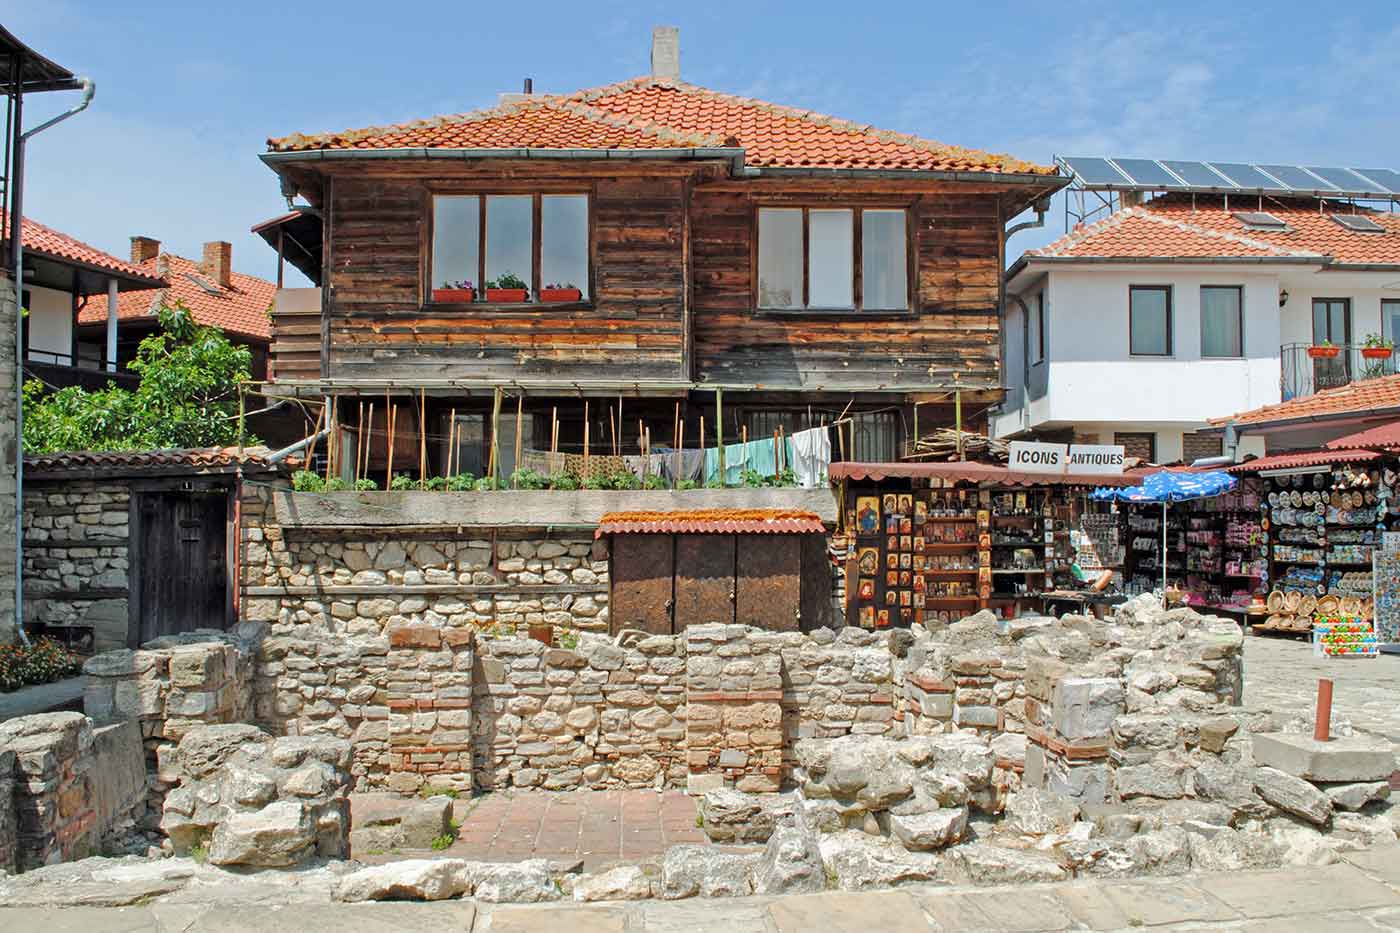 Nessebar Old Town